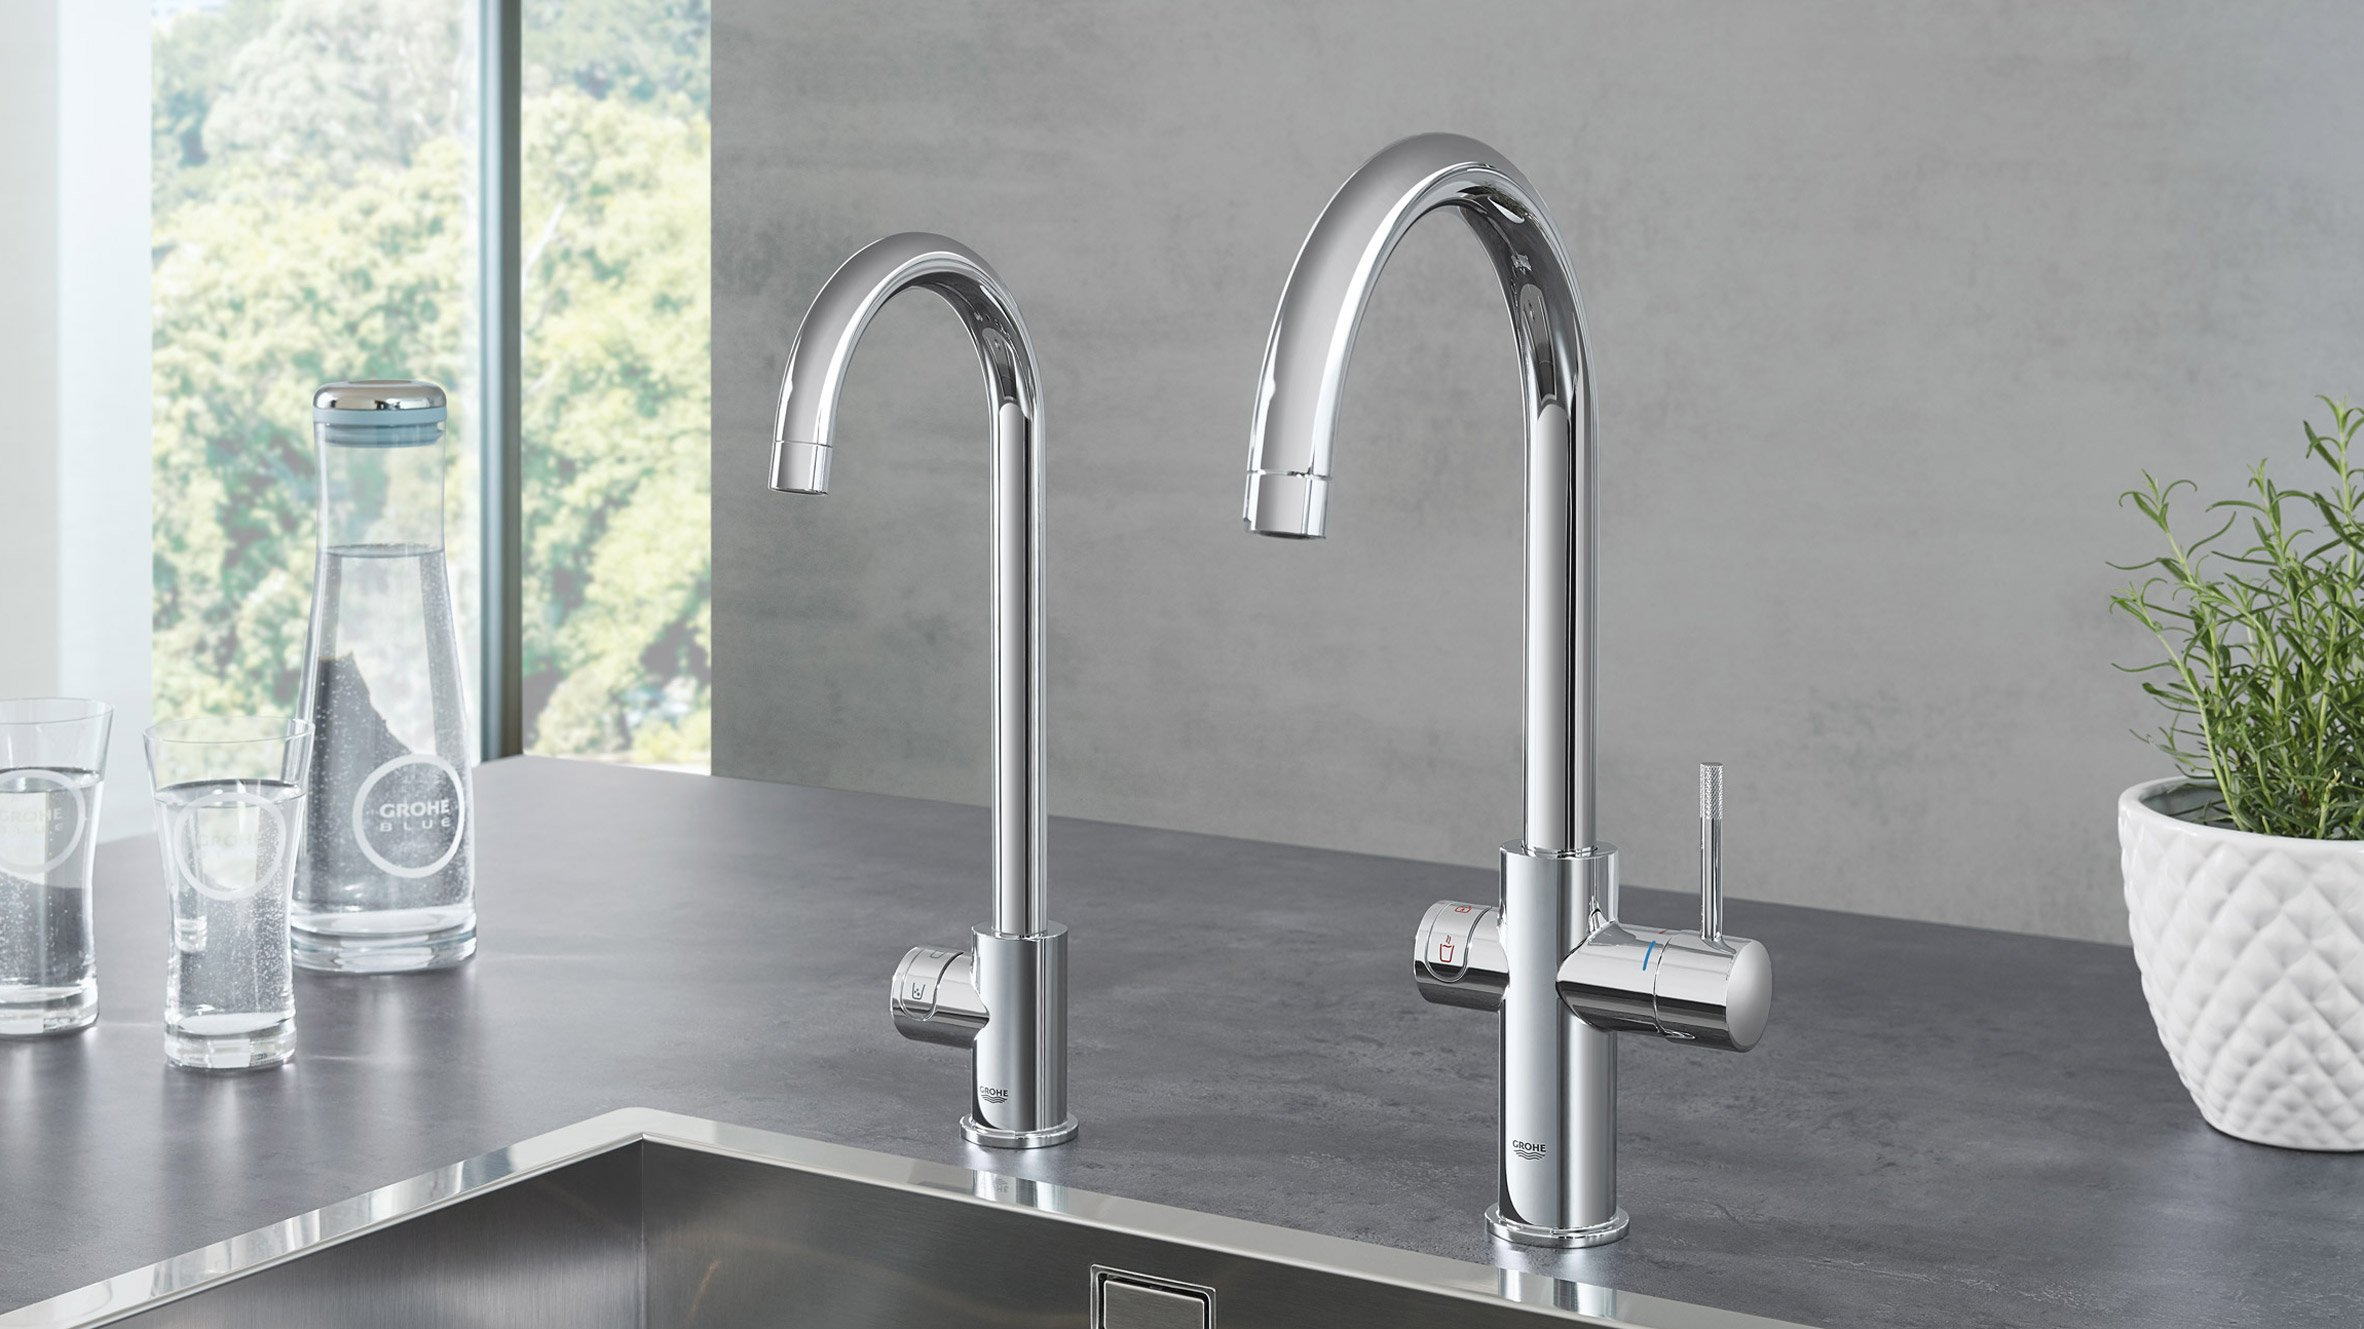 Grohe's Blue and Red taps instant boiling or sparkling water